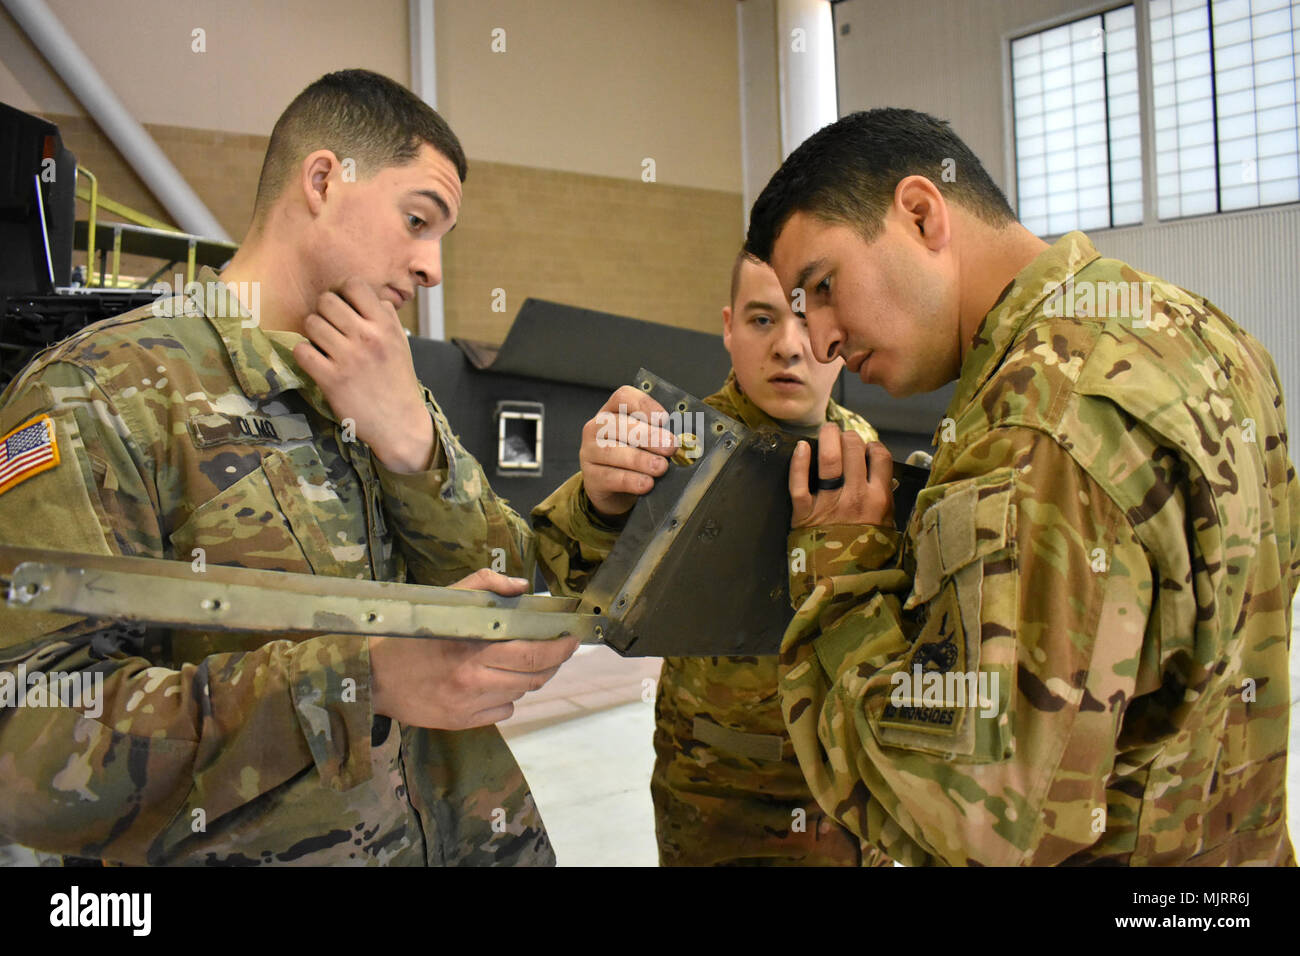 From left, Spc. Nicholas Olmo, Spc. Brandon Arthur and Staff Sgt. Javier Fuentes, all assigned to 1st Battalion, 501st Aviation Regiment, Combat Aviation Brigade, 1st Armored Division, inspect an upper support fairing from an AH-64D Apache helicopter in the battalion’s hanger at Fort Bliss March 1, 2018, while conducting in-depth maintenance on the aircraft. Armed Forces and civilians displaying courage bravery dedication commitment and sacrifice Stock Photo